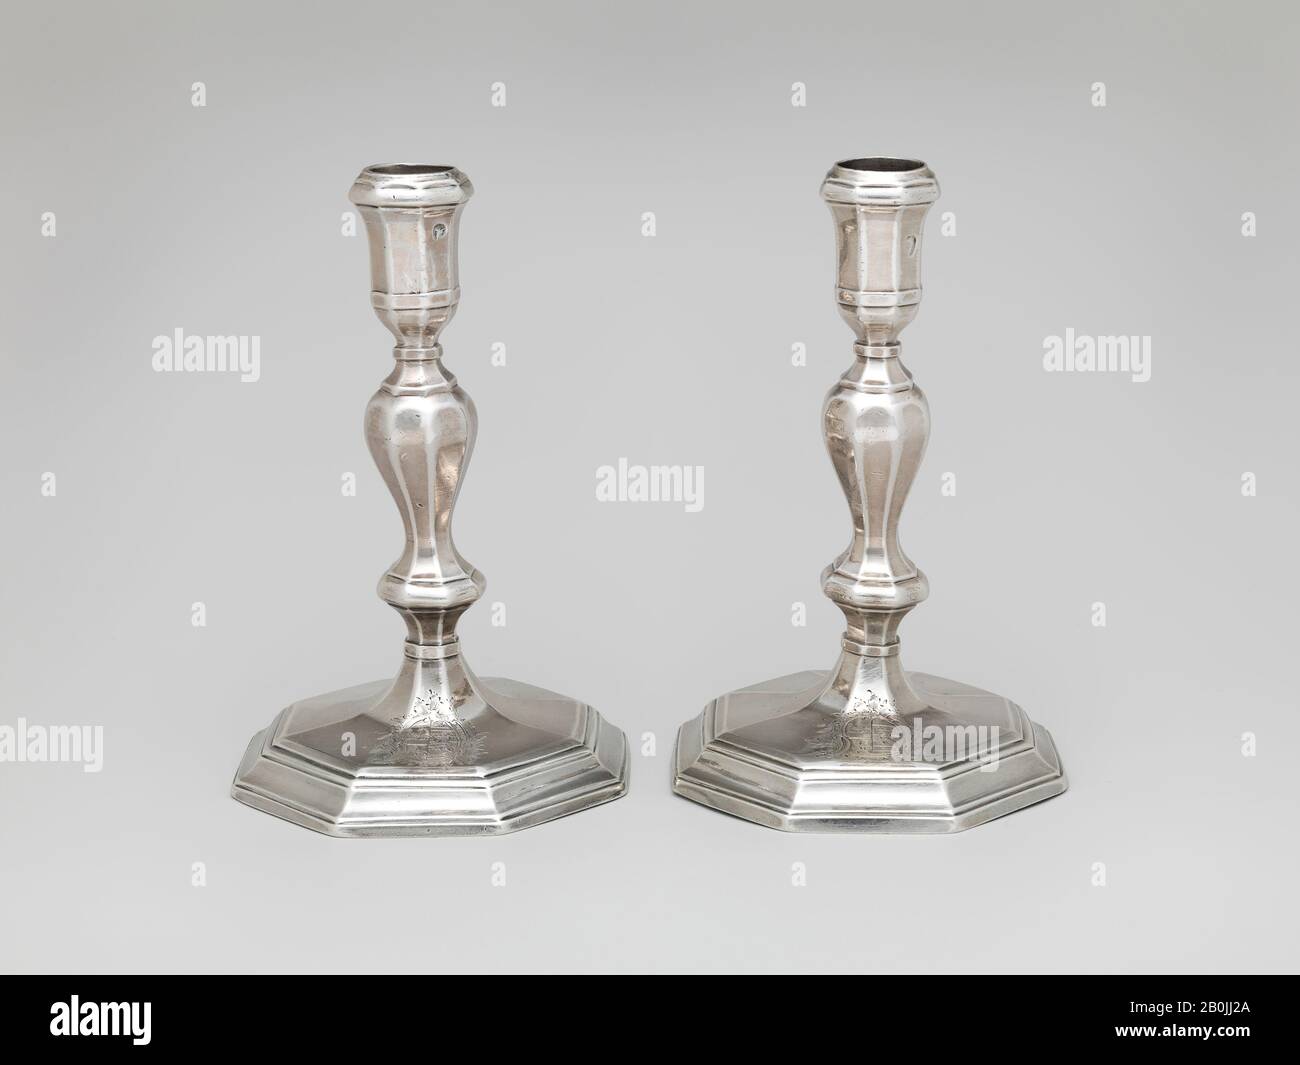 Thomas Merry I, Pair of candlesticks, British, London, Thomas Merry I (active 1701–ca. 1724), 1706/7, British, London, Silver, Overall (.97 confirmed): 6 13/16 x 4 3/8 in., 12 oz. 5 dwt. (17.3 x 11.1 cm, 0.3815kg), Overall (.98 confirmed): 6 13/16 x 4 3/8 in., 12 oz. 10 dwt. (17.3 x 11.1 cm, 0.3895kg), Metalwork-Silver Stock Photo